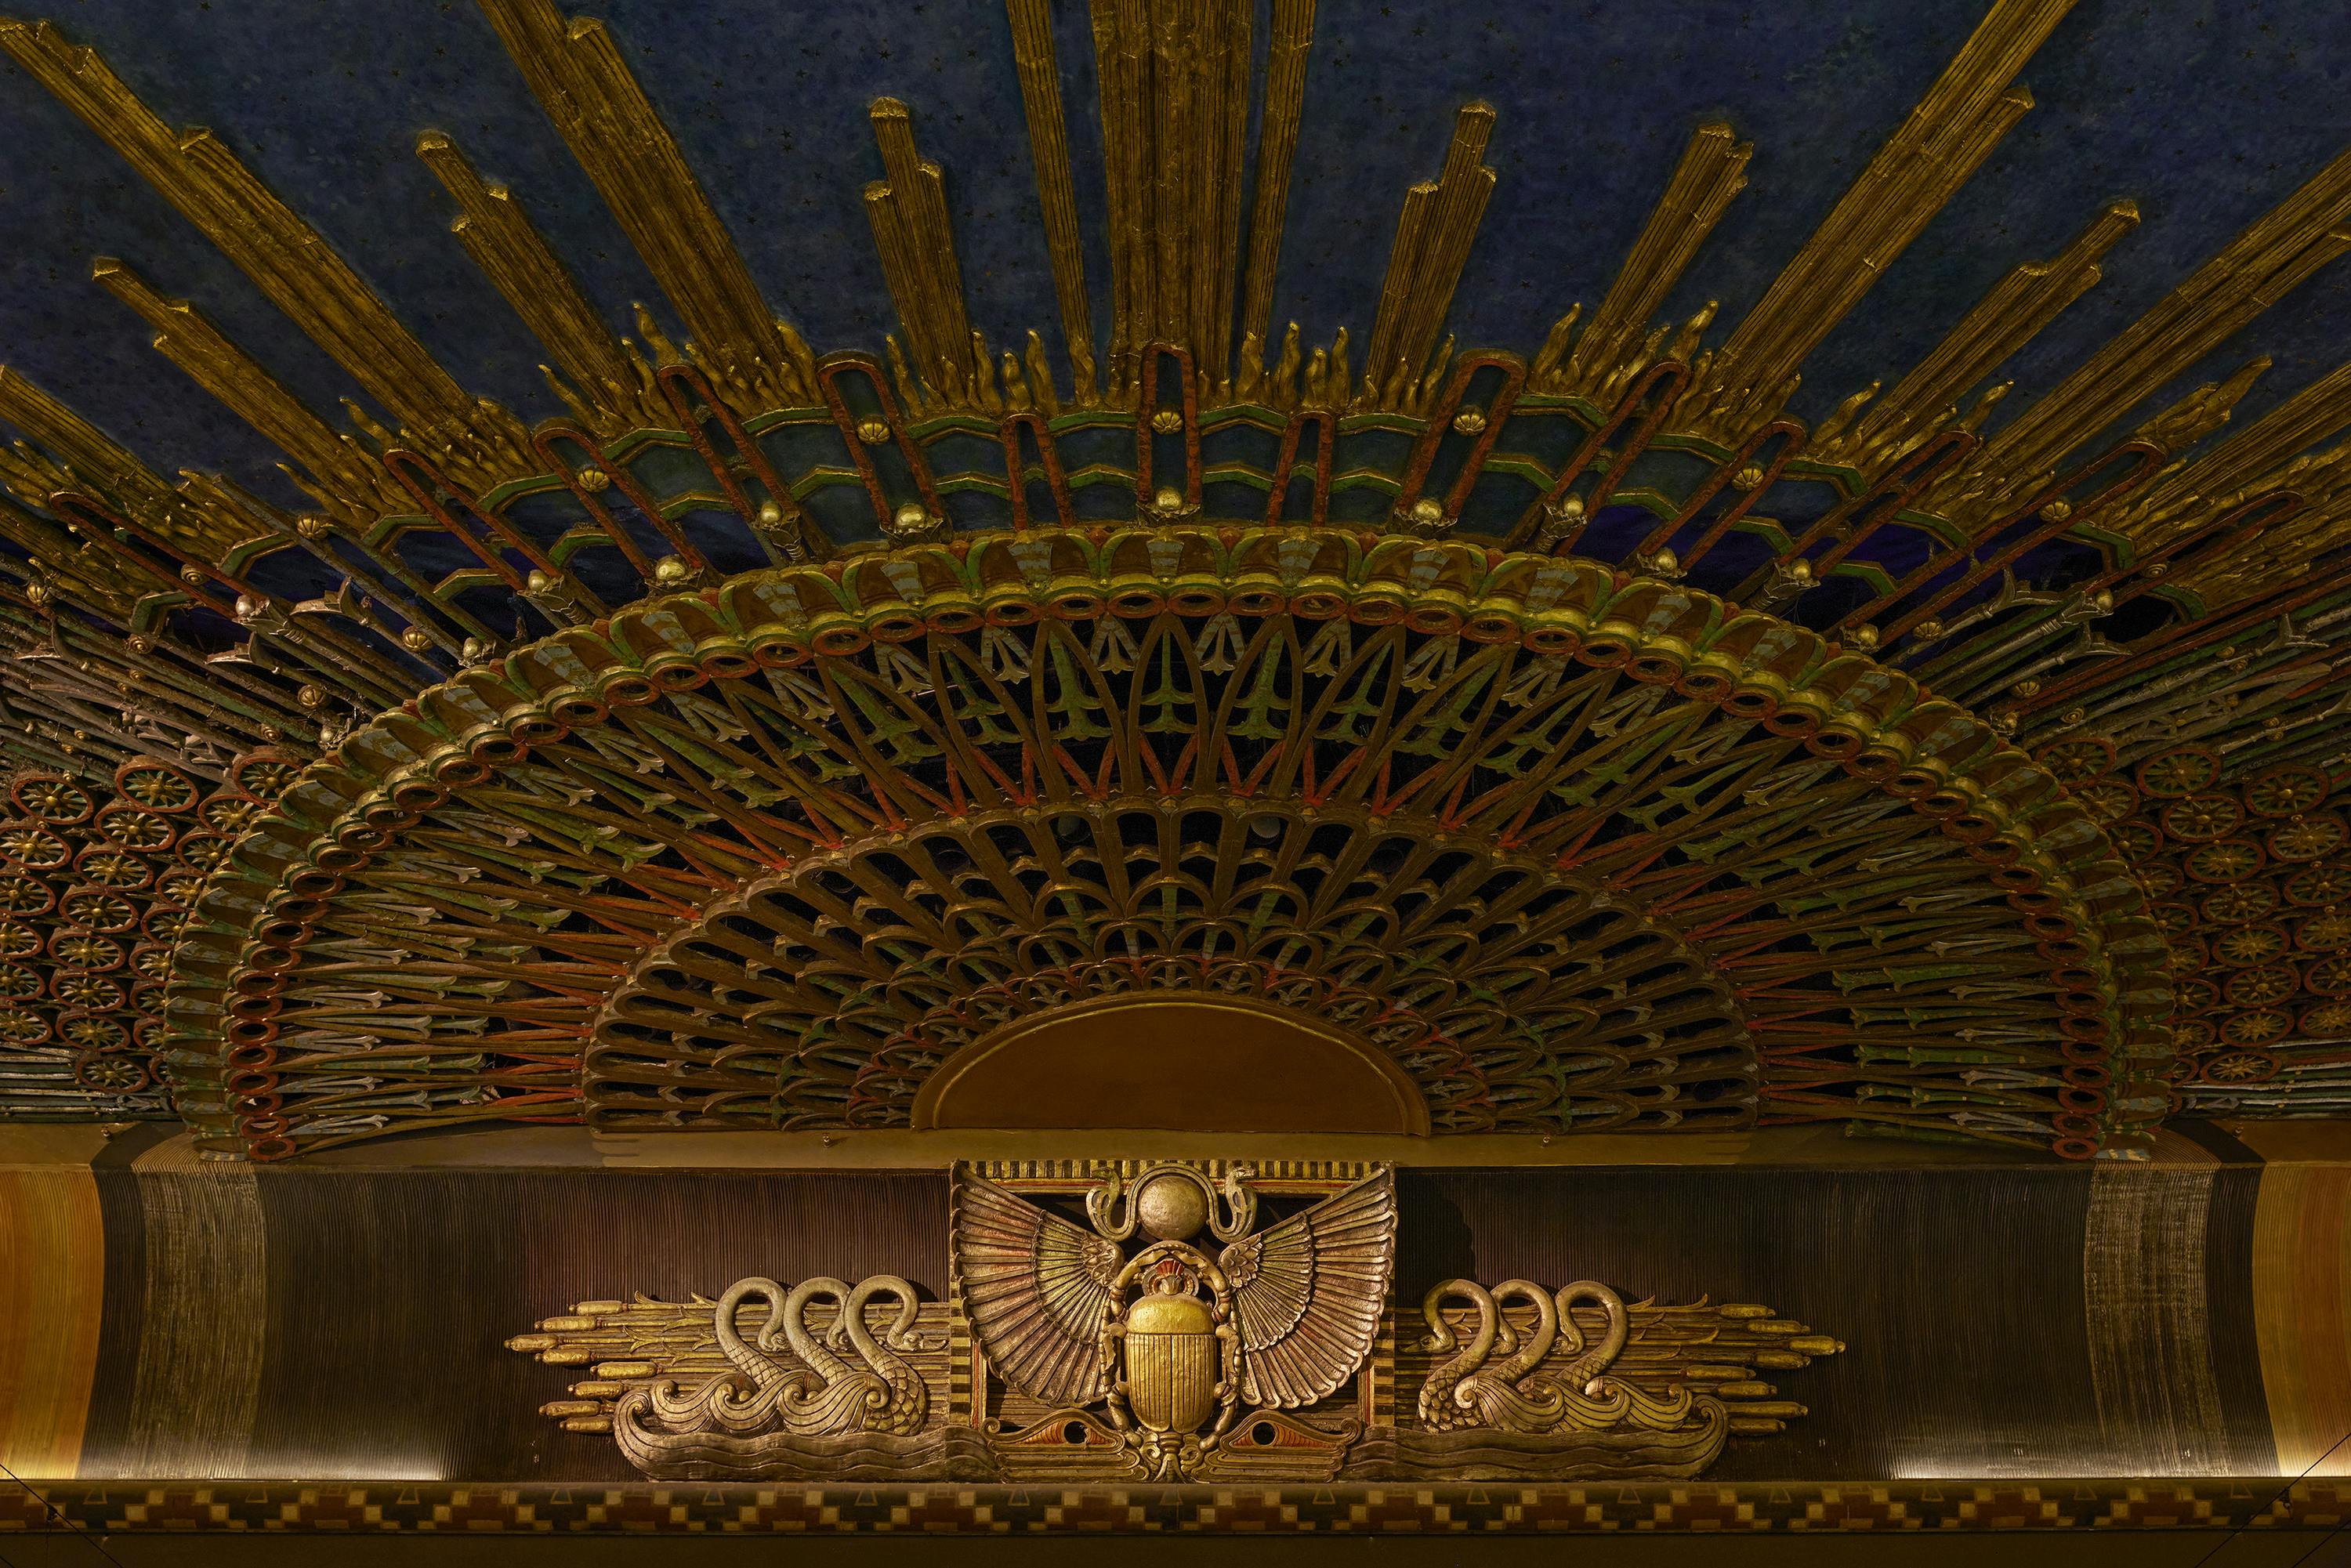 The Egyptian Theater ceiling features a gold scarab and ornate gold detailing.